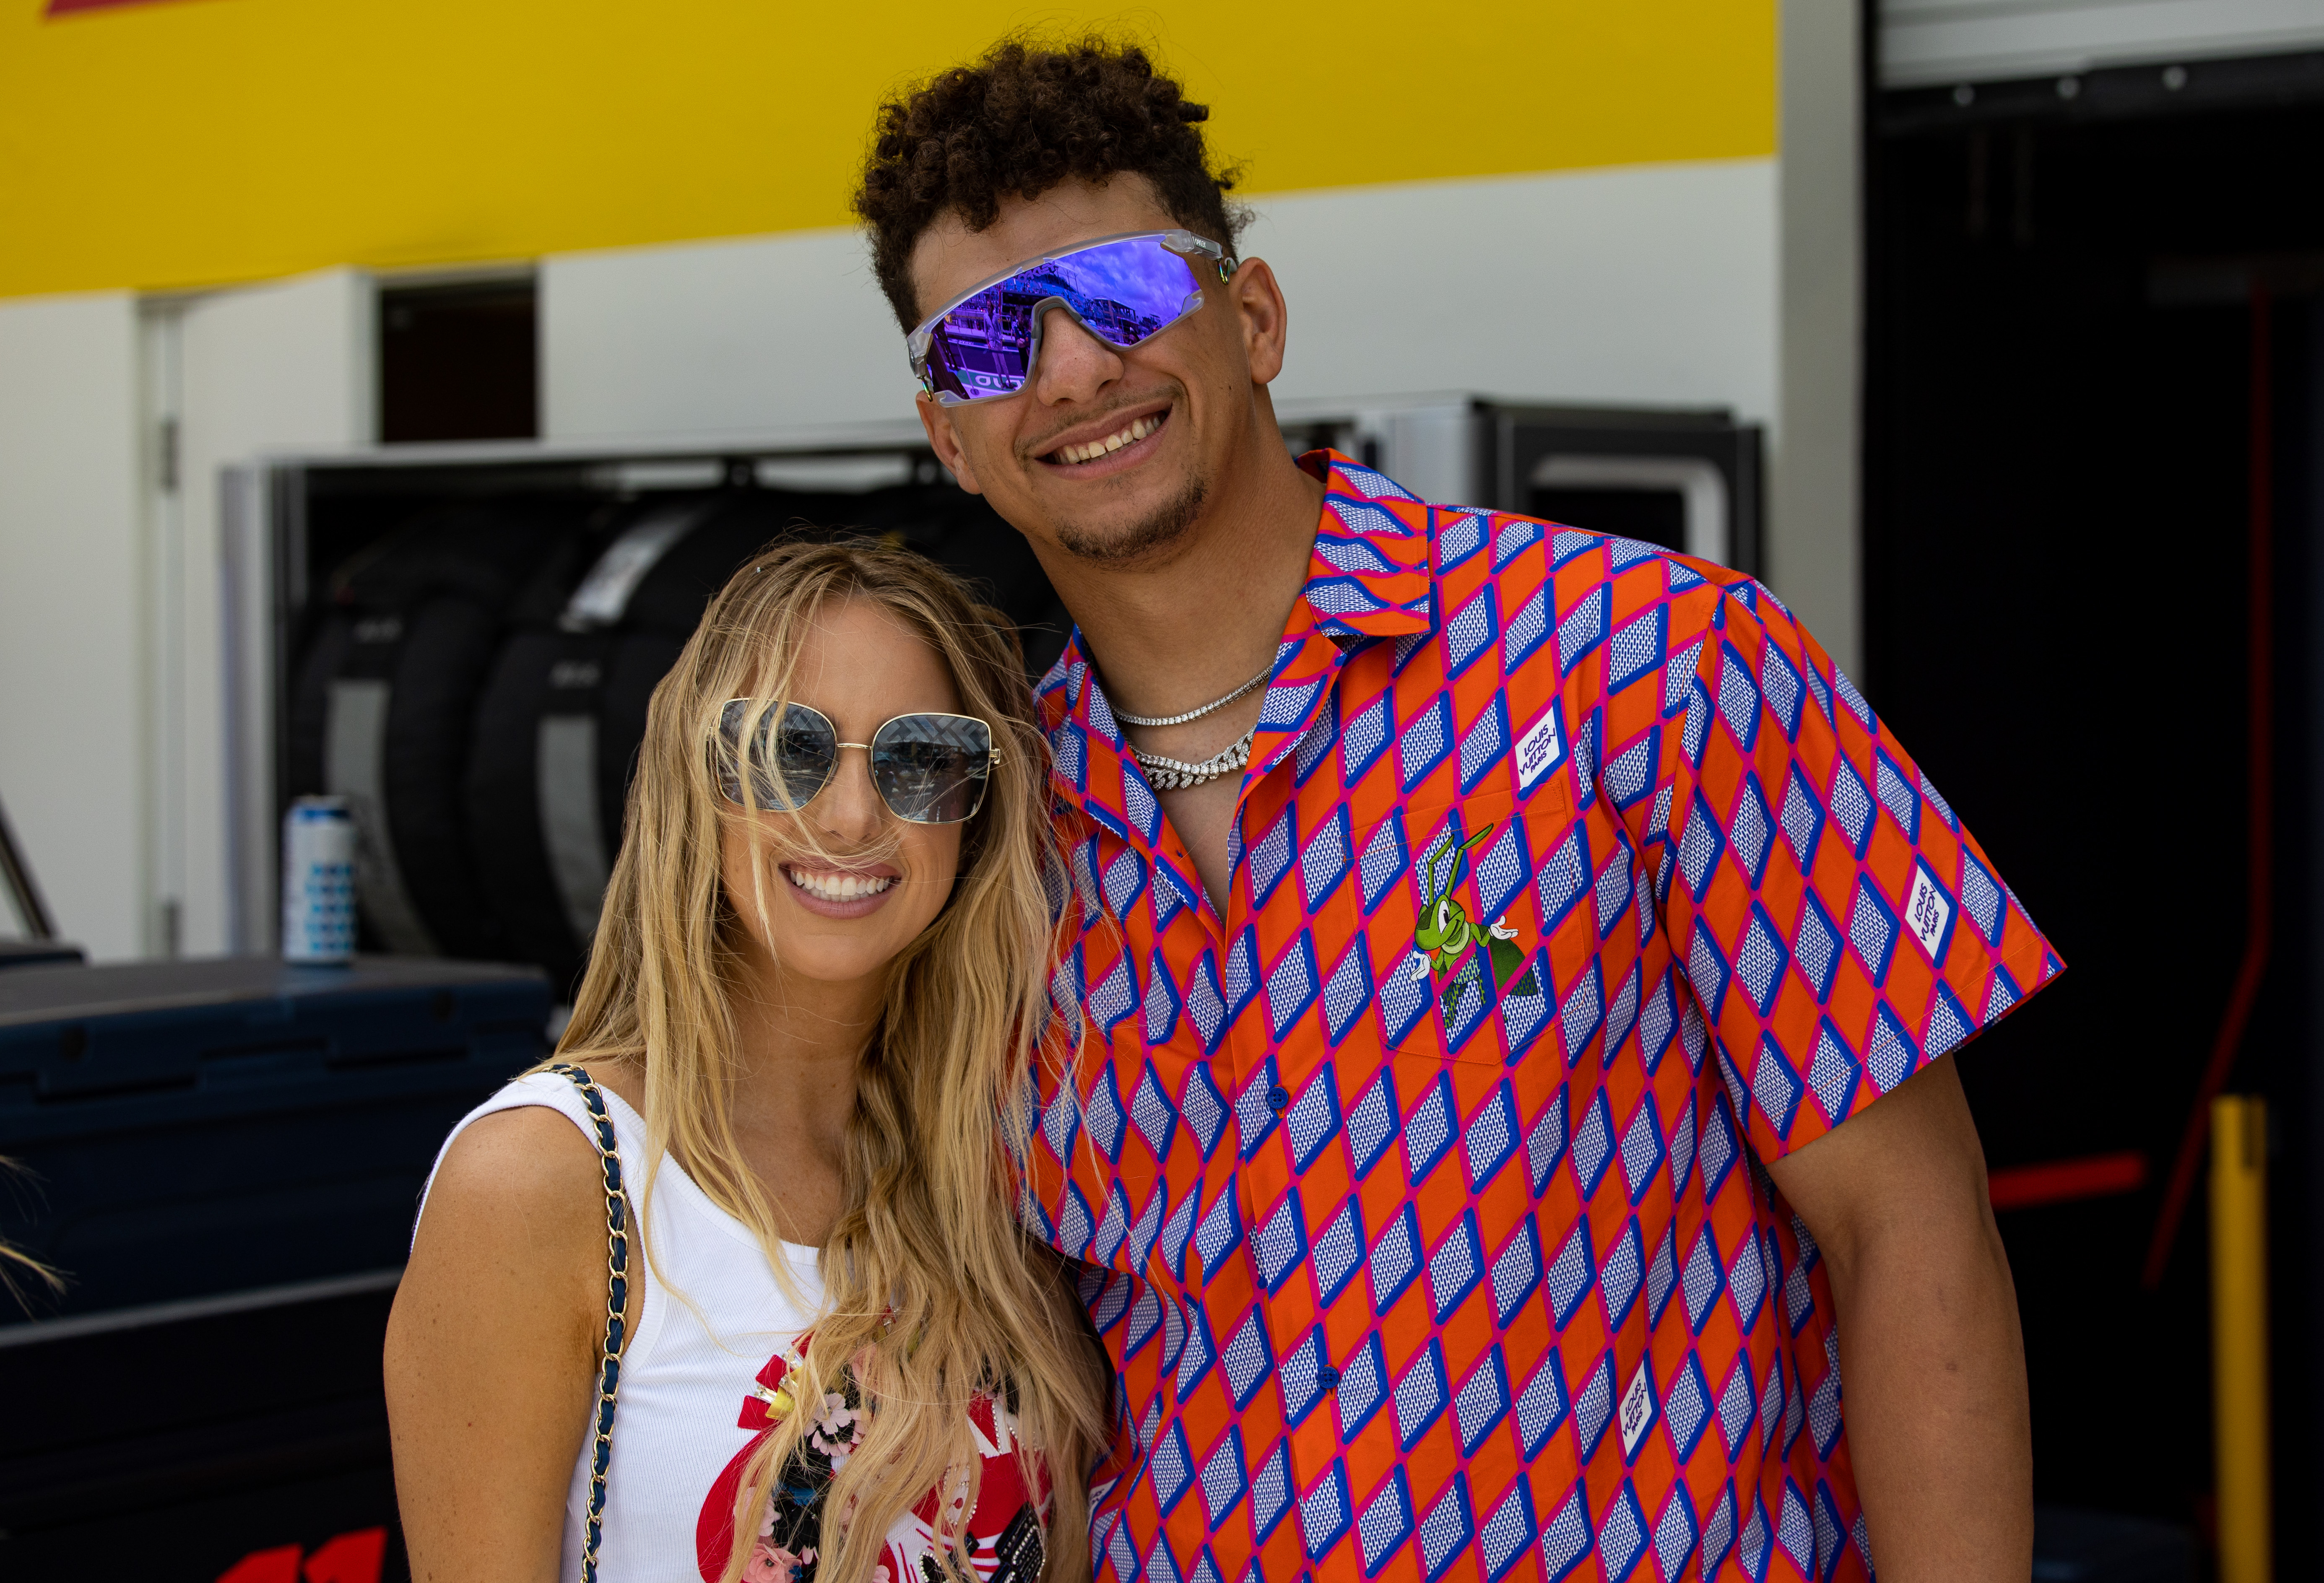 Patrick Mahomes and his spouse, Brittany Mahomes, captured in the Red Bull garage while attending the F1 Grand Prix of Miami at Miami International Autodrome on May 7, 2023 | Source: Getty Images